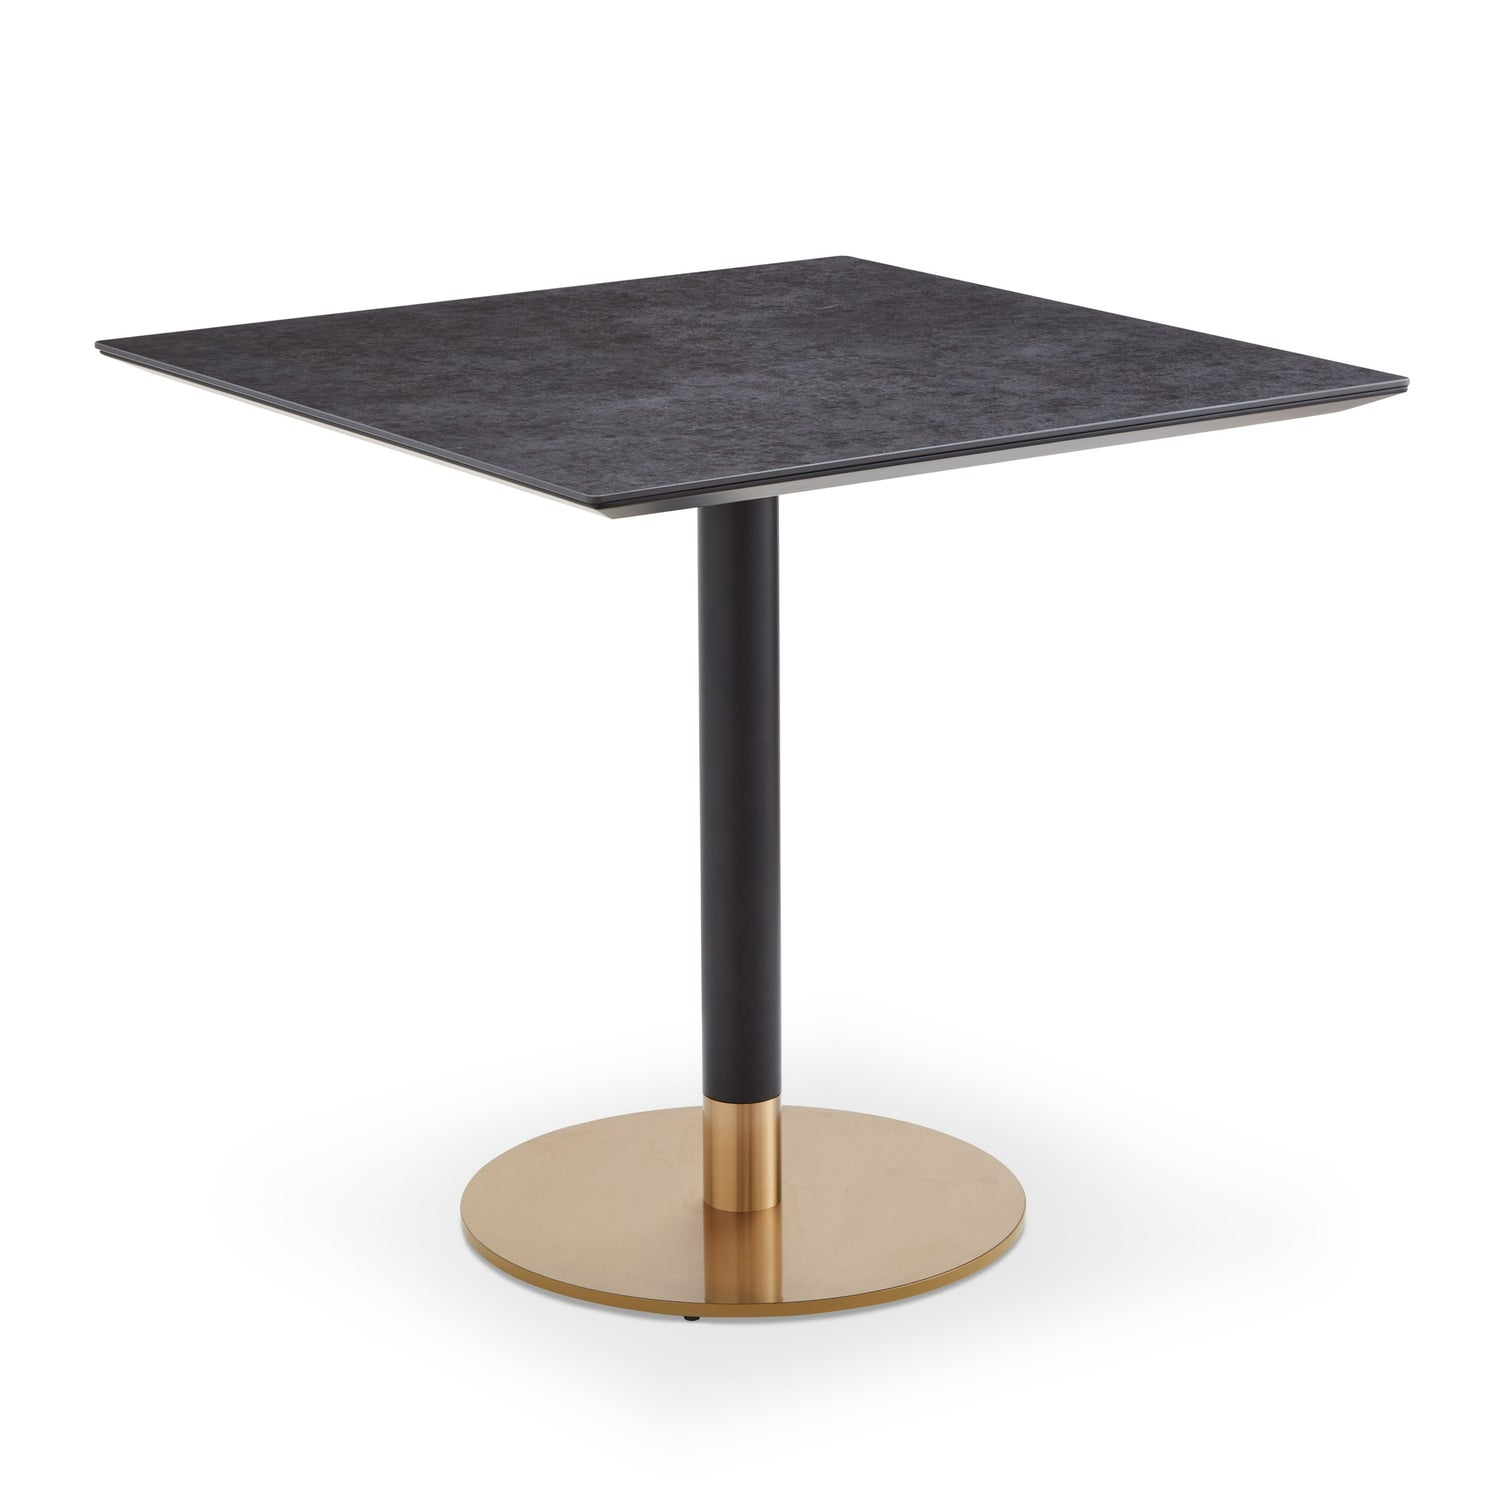  LiangAndEimil-Liang & Eimil Theodore Dining Table in Dark Grey-Grey 045 